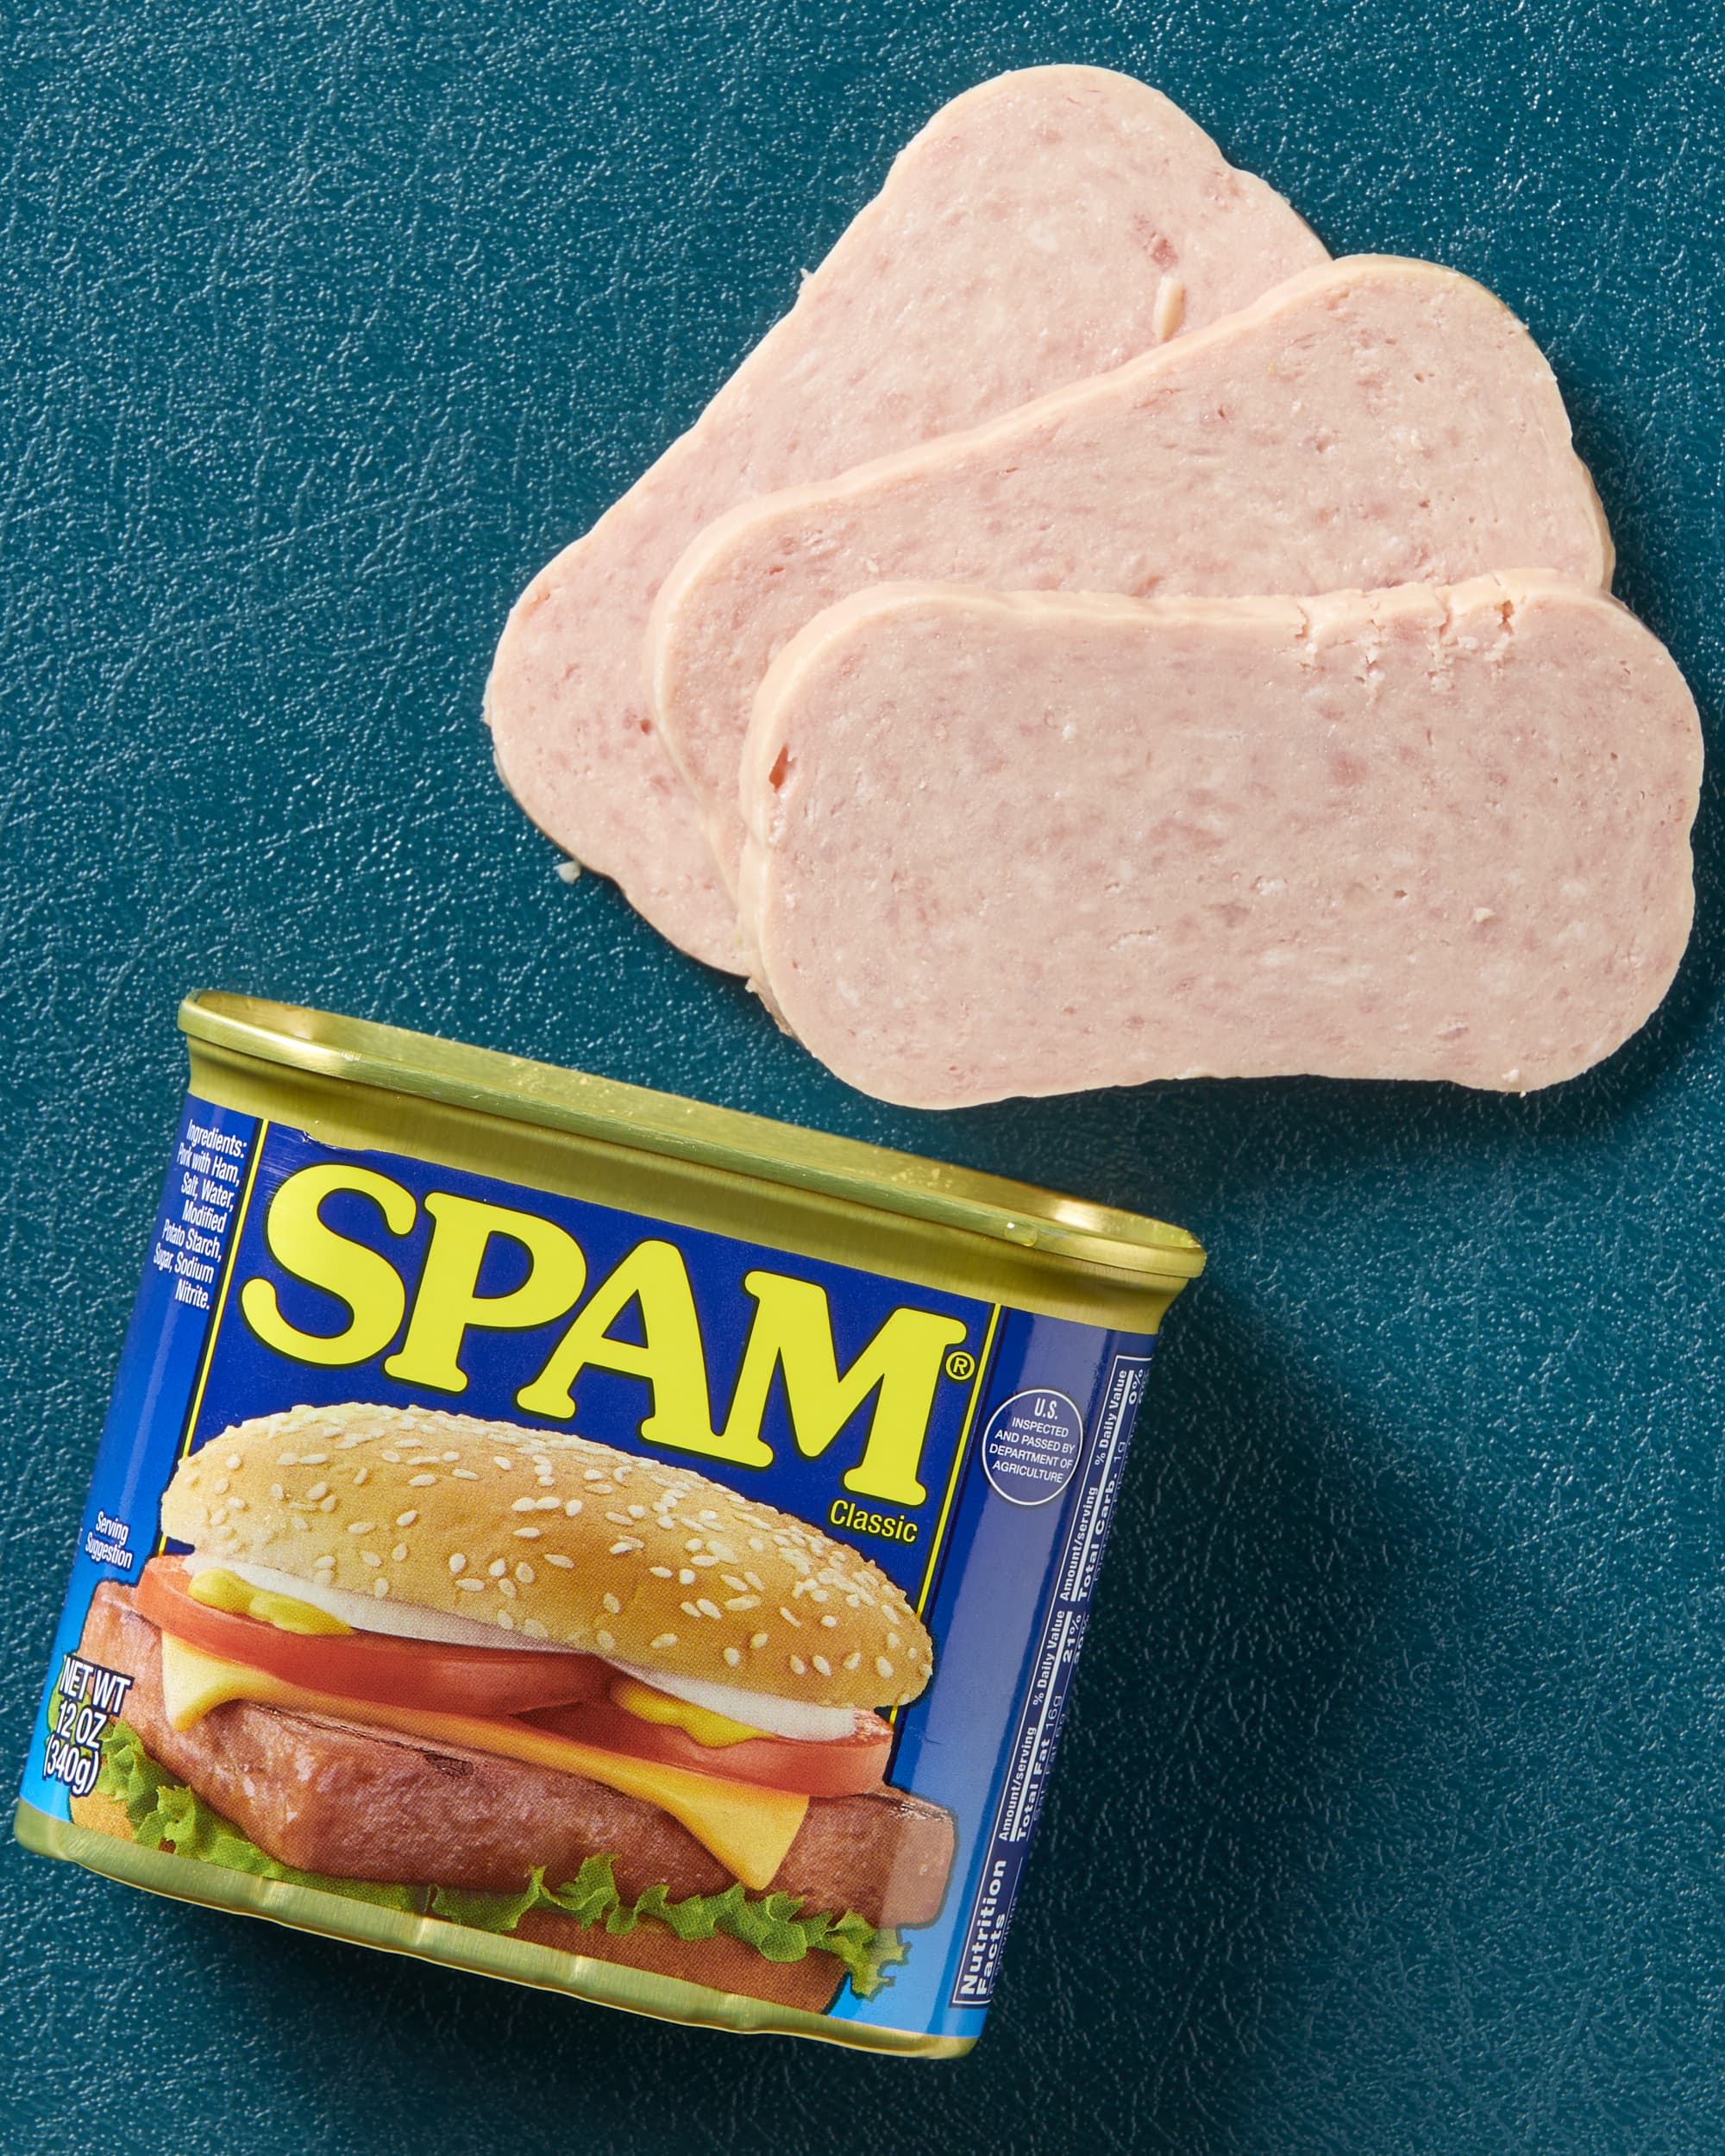 What Is Spam Made Of?, Cooking School